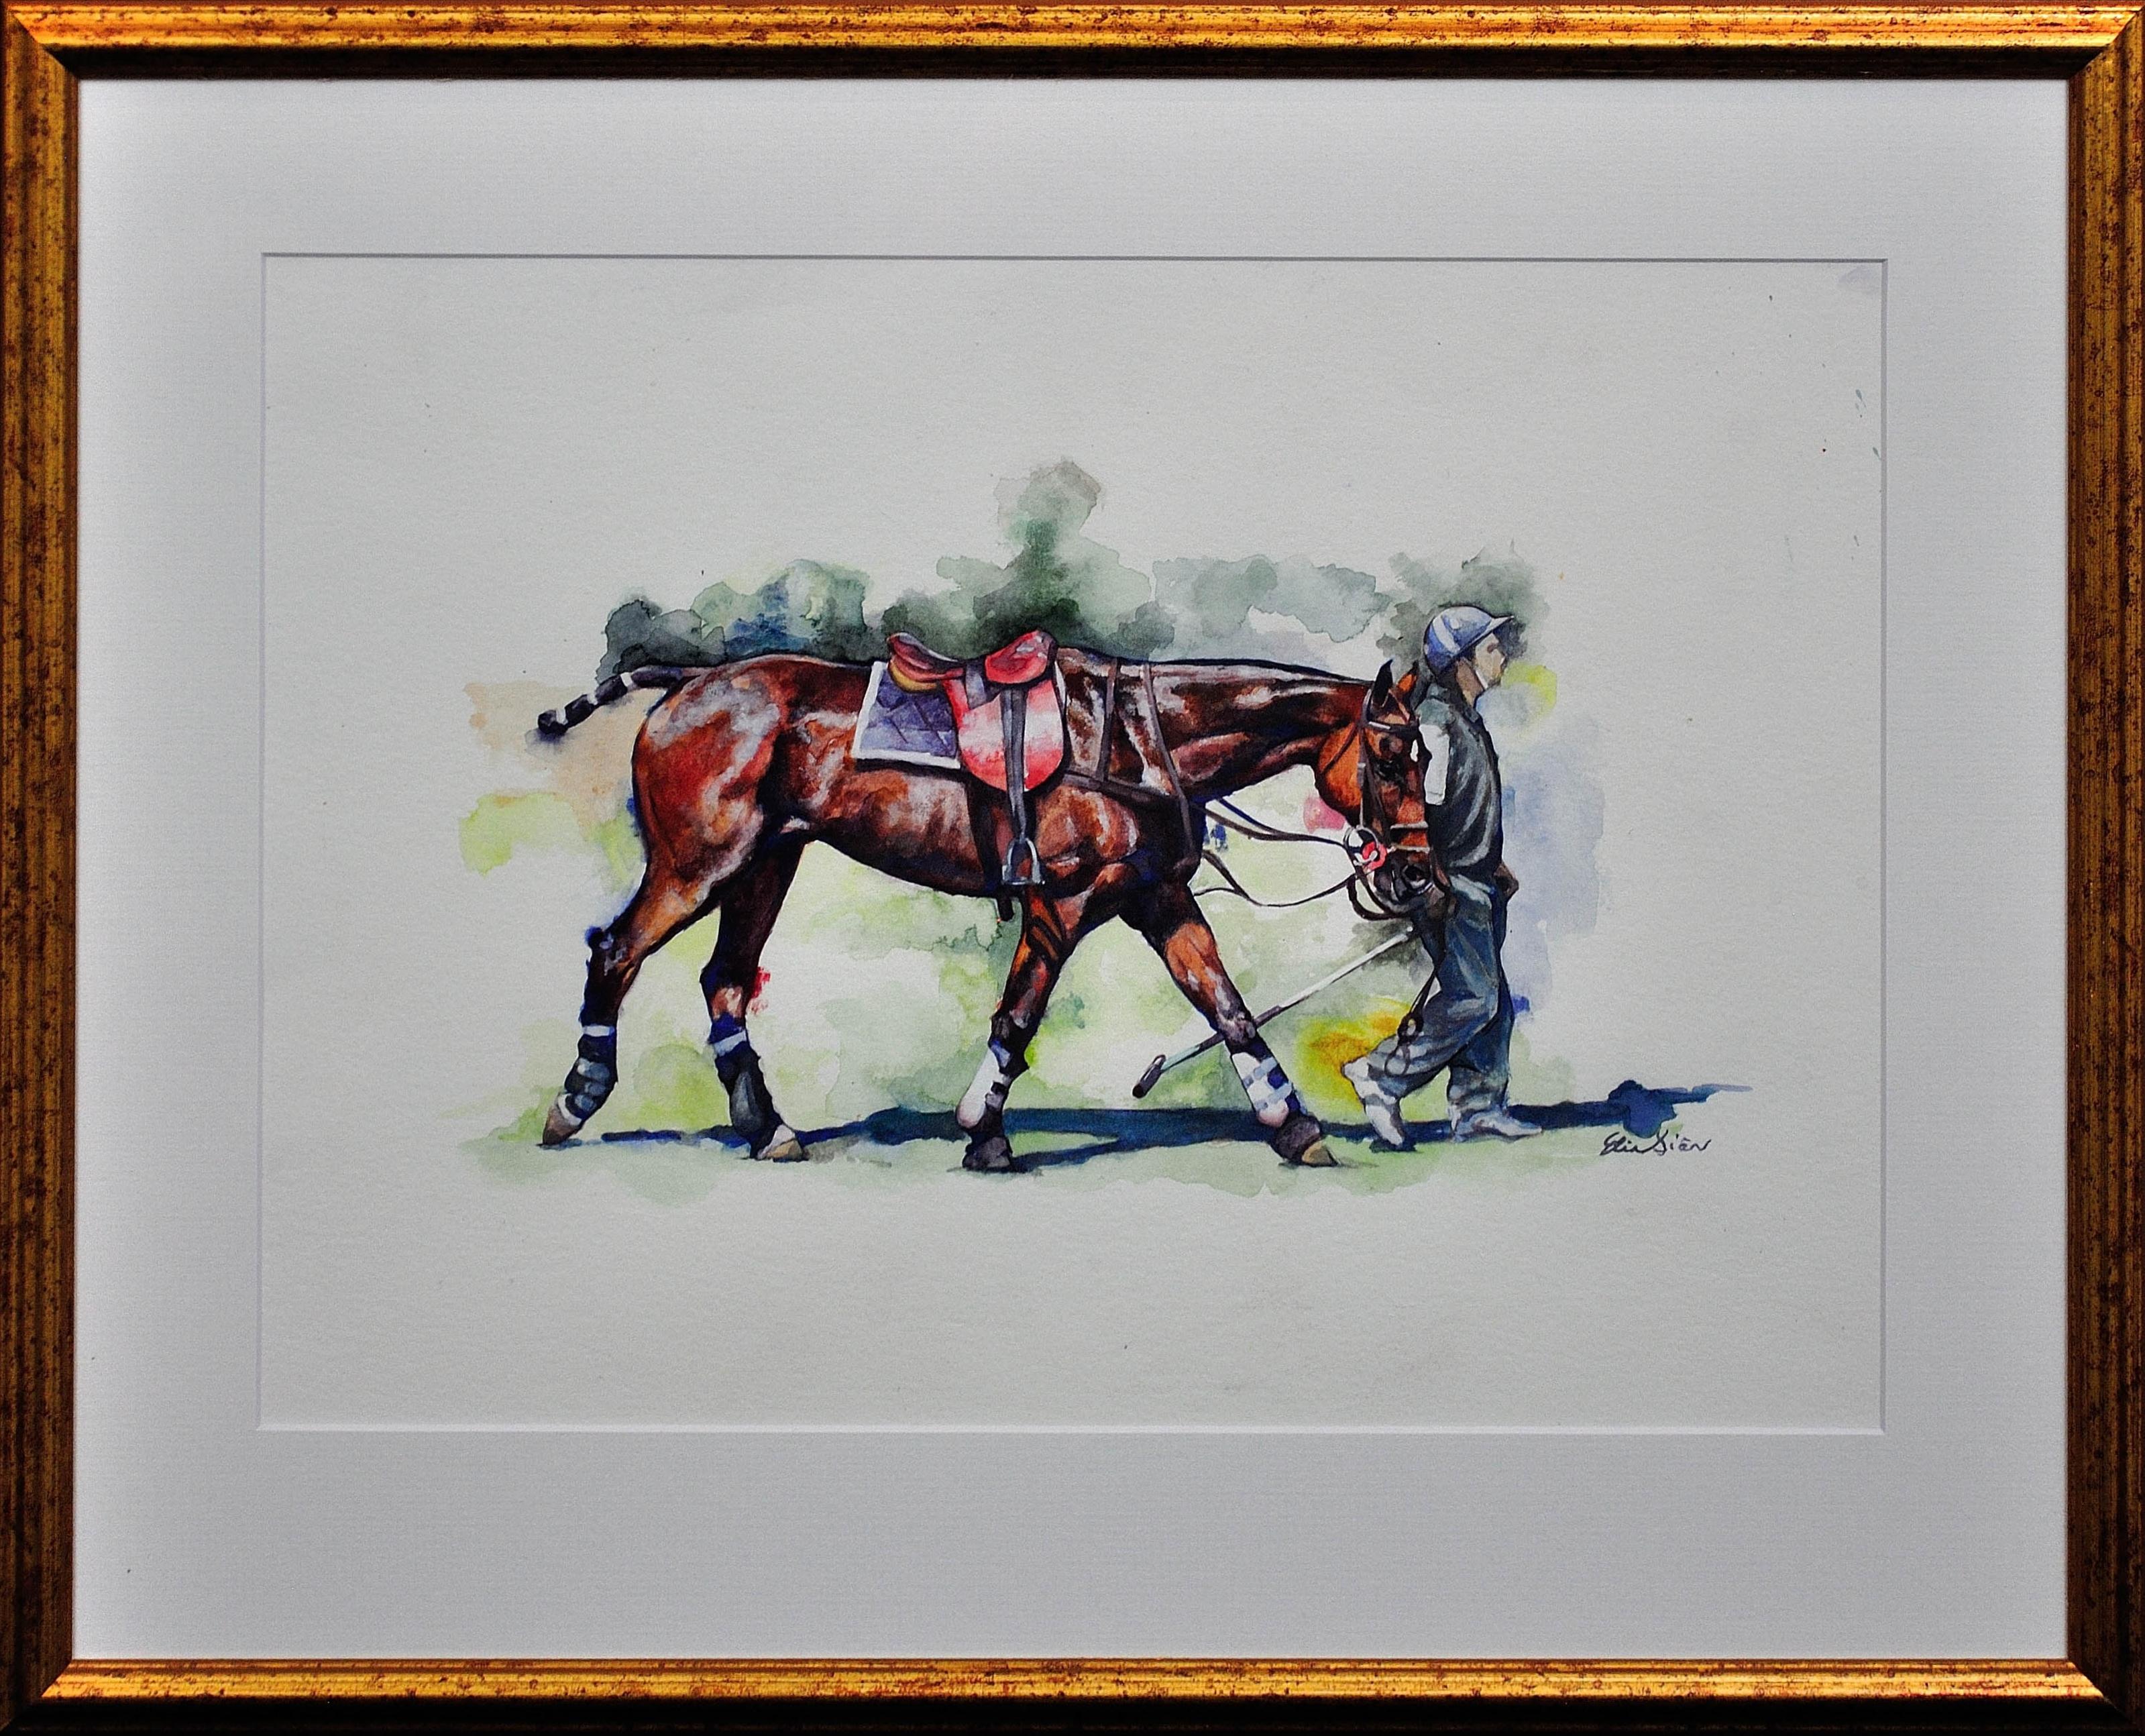 Elin Sian Blake Animal Art - Polo Match, Cirencester, Player Leading Pony. Cotswolds. Framed Watercolor.